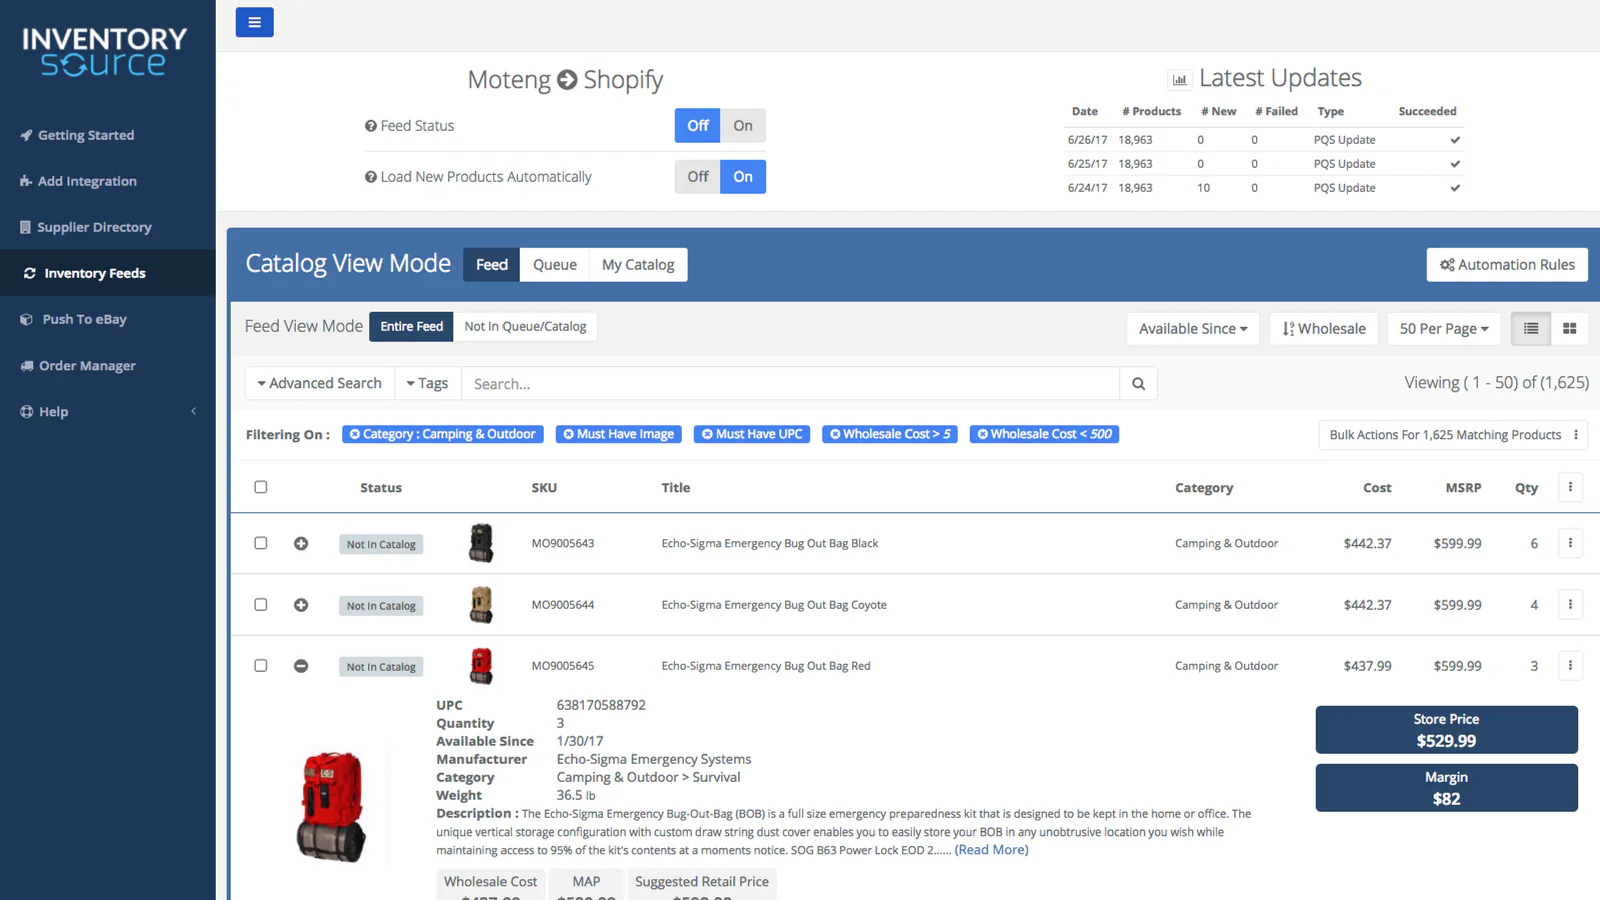 A view of Inventory Source dropshipping software, showing bugout backpack product listings.